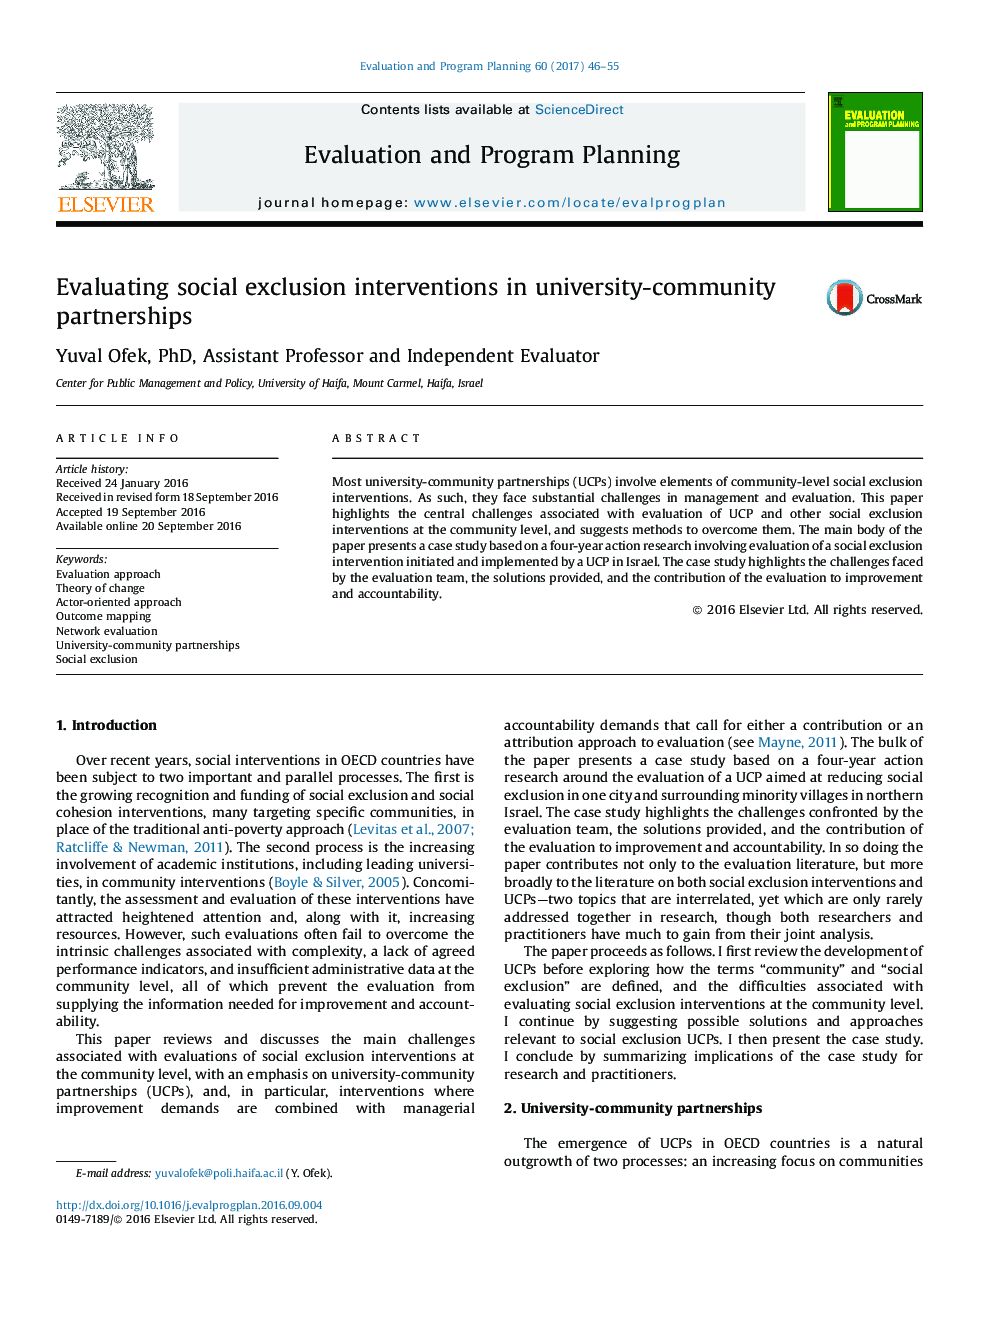 Evaluating social exclusion interventions in university-community partnerships